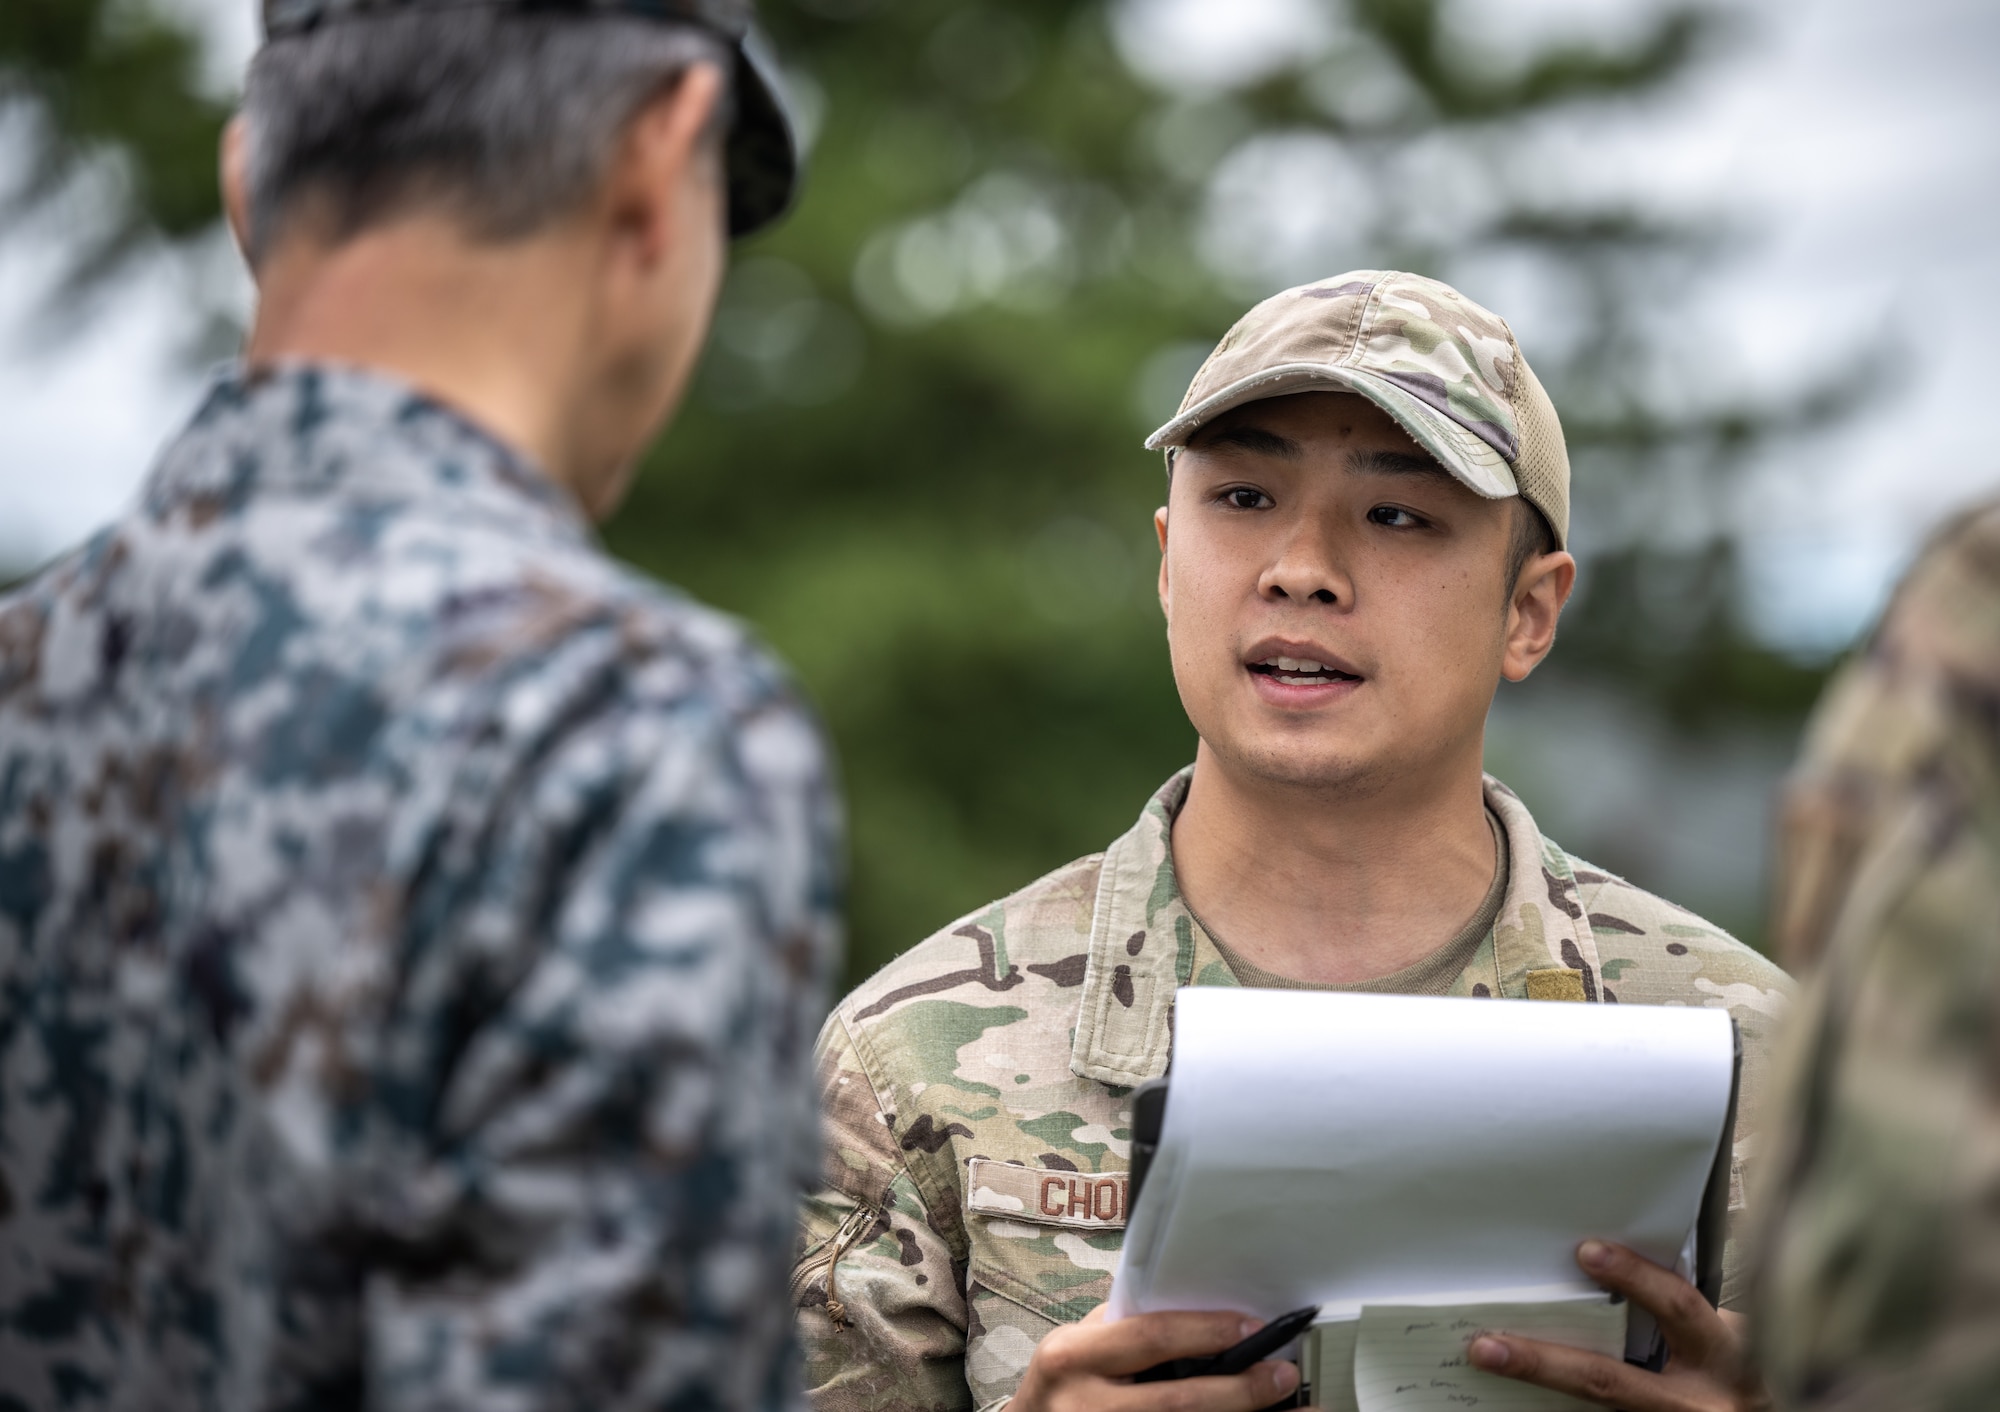 U.S. Air Force Senior Airman Kelvin Chong, a Japanese translator assigned to the 18th Security Forces Squadron, speaks to Lt. Gen. Ryusuke Morikawa, commander of Air Support Command in support of Mobility Guardian 2023, at Yakumo Sub Base, Japan, July 13, 2023. During MG23, Chong served as the strategic cultural representative for the Japanese Air Self-Defense Force and U.S. Air Force, ensuring accurate and efficient communication among partner nations. A multilateral endeavor, MG23 features participating countries – Australia, Canada, France, Japan, New Zealand, United Kingdom, and the United States – operating approximately 70 mobility aircraft across multiple locations spanning a 3,000 mile exercise area from July 5-21. (U.S. Air Force photo by Tech. Sgt. Alexander Cook